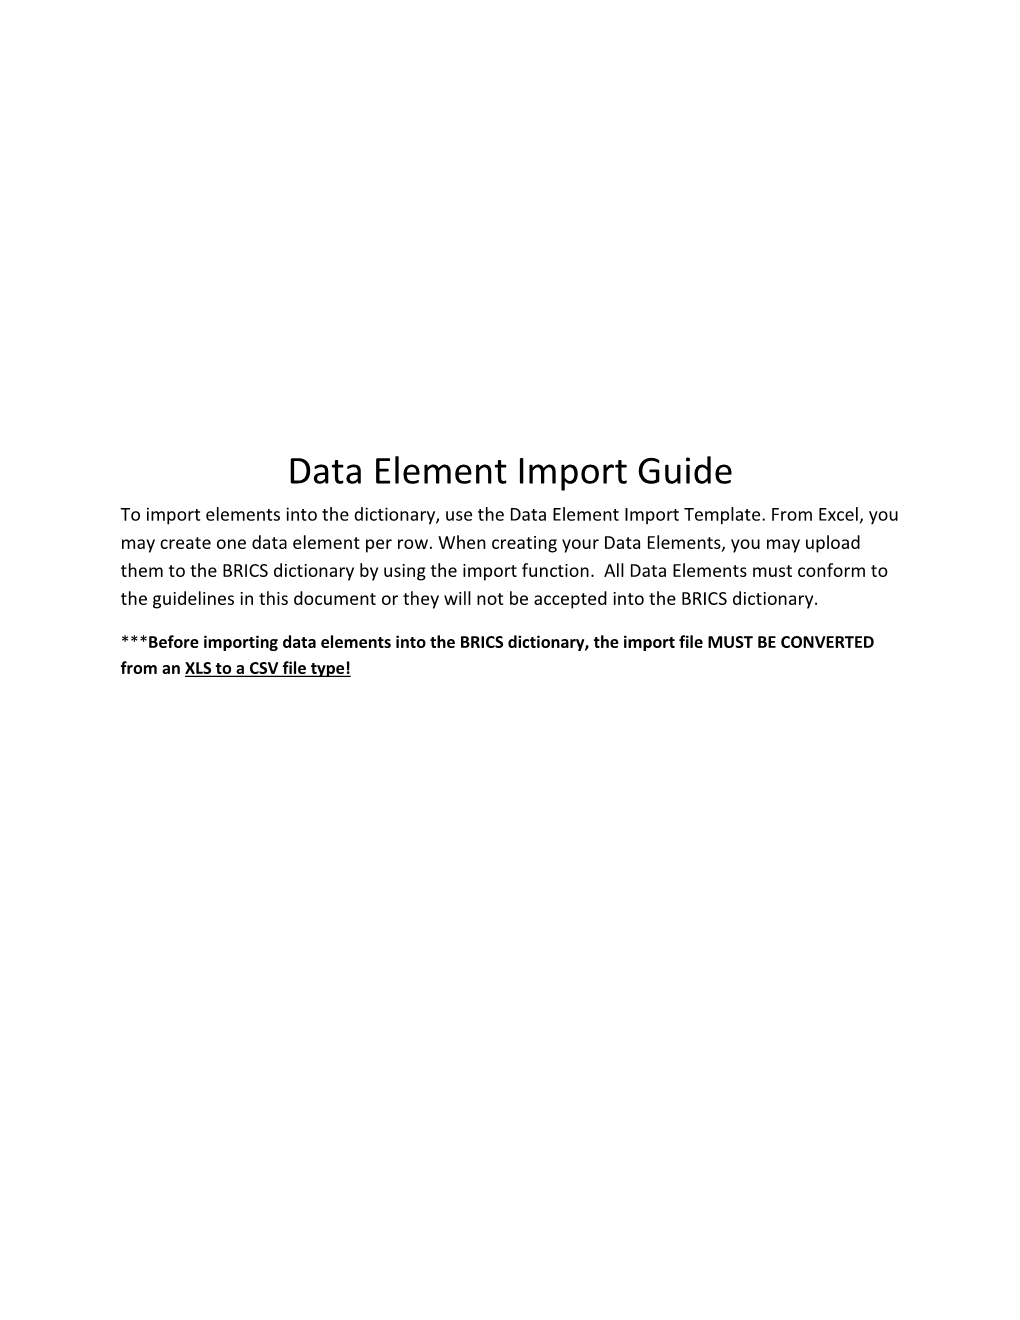 Data Element Import Guide to Import Elements Into the Dictionary, Use the Data Element Import Template